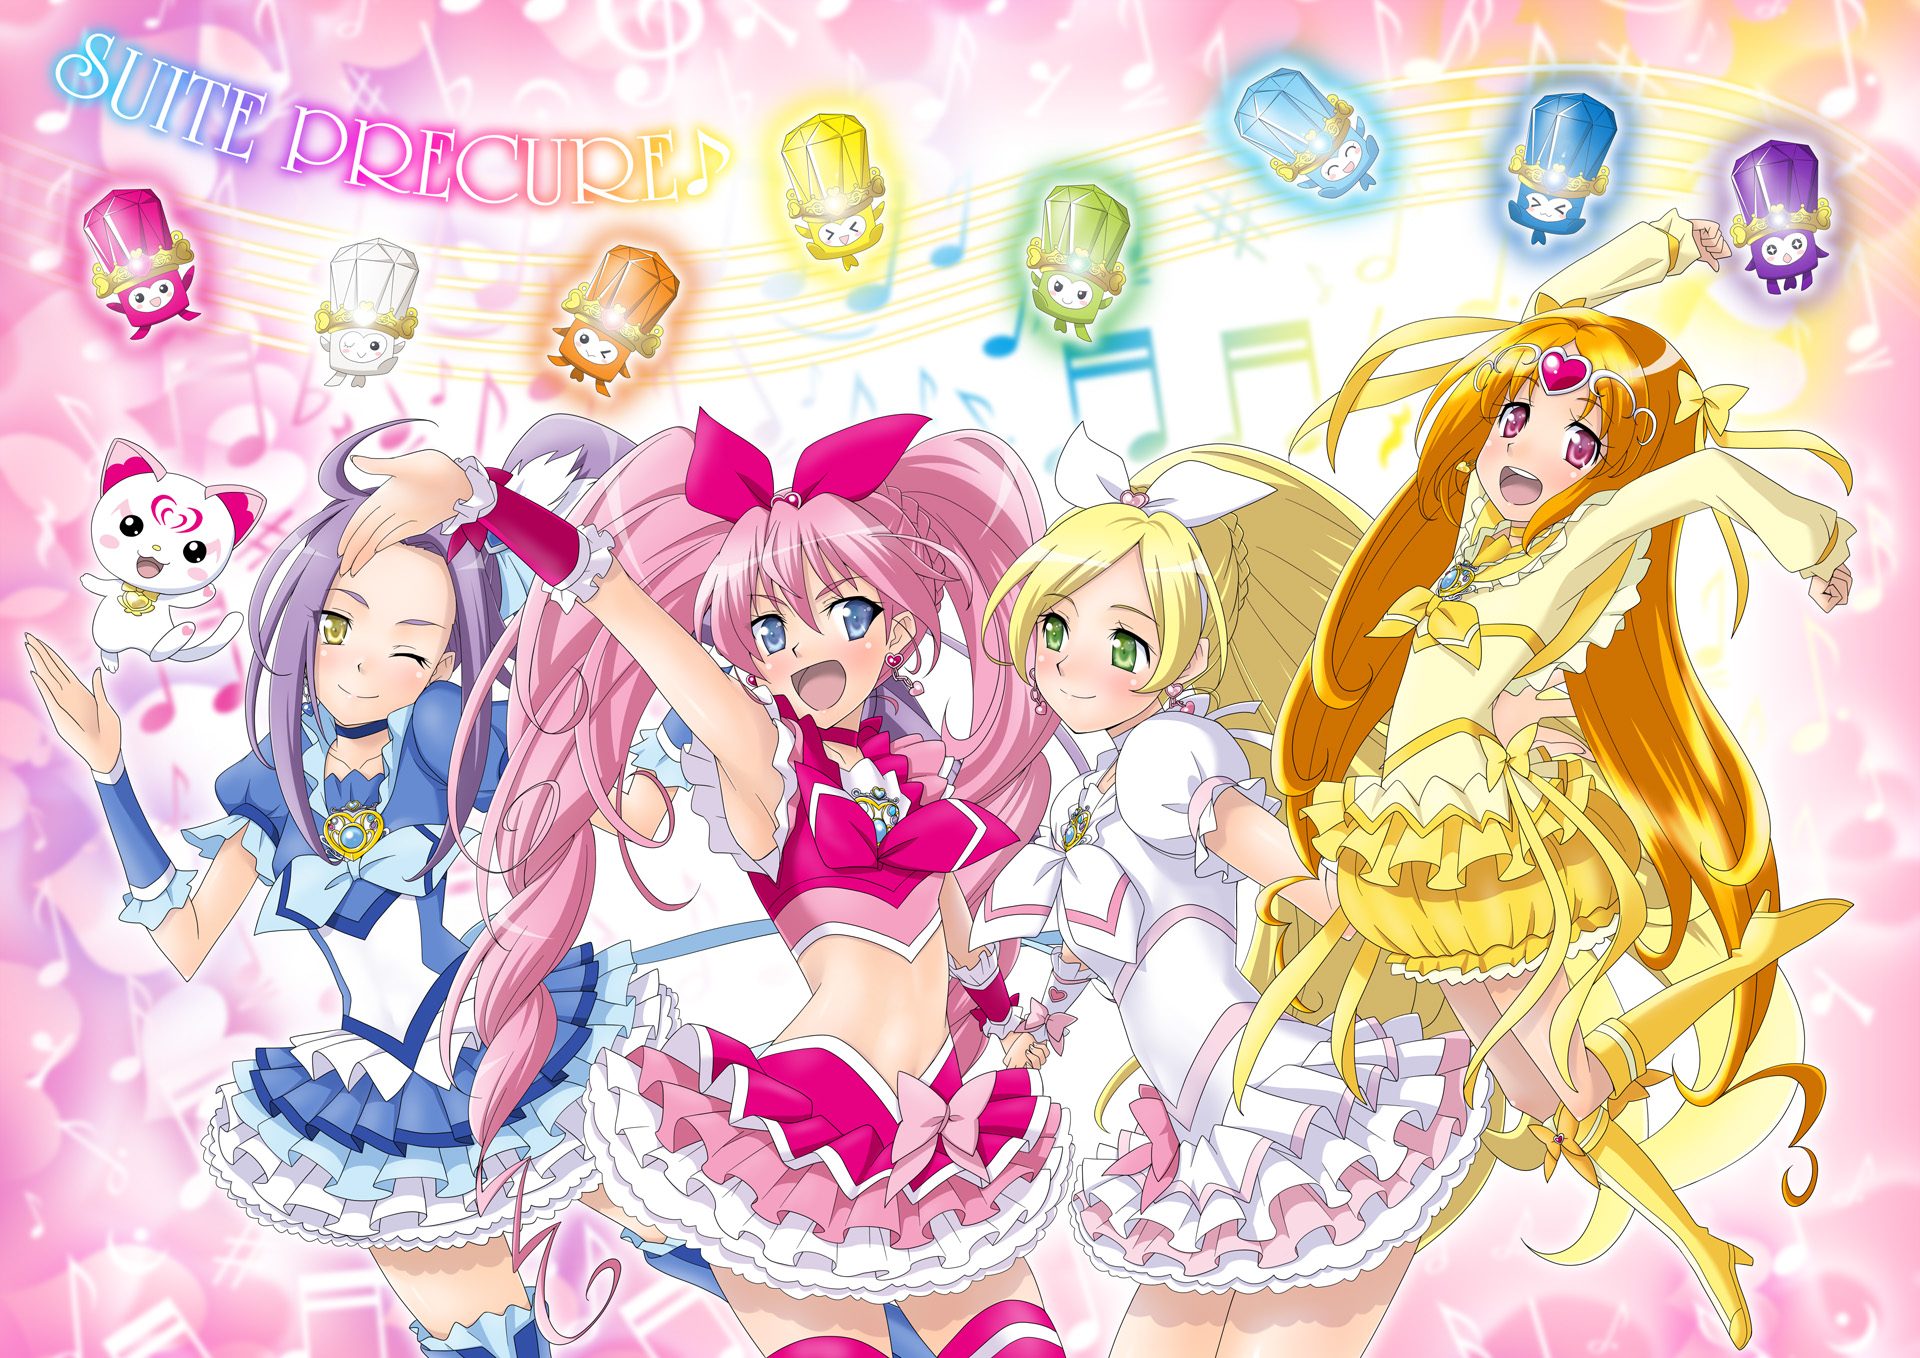 Anime Anime Girls Pretty Cure Suite Precure Magical Girls Cure Melody Cure Rhythm Cure Beat Cure Mus 1920x1358